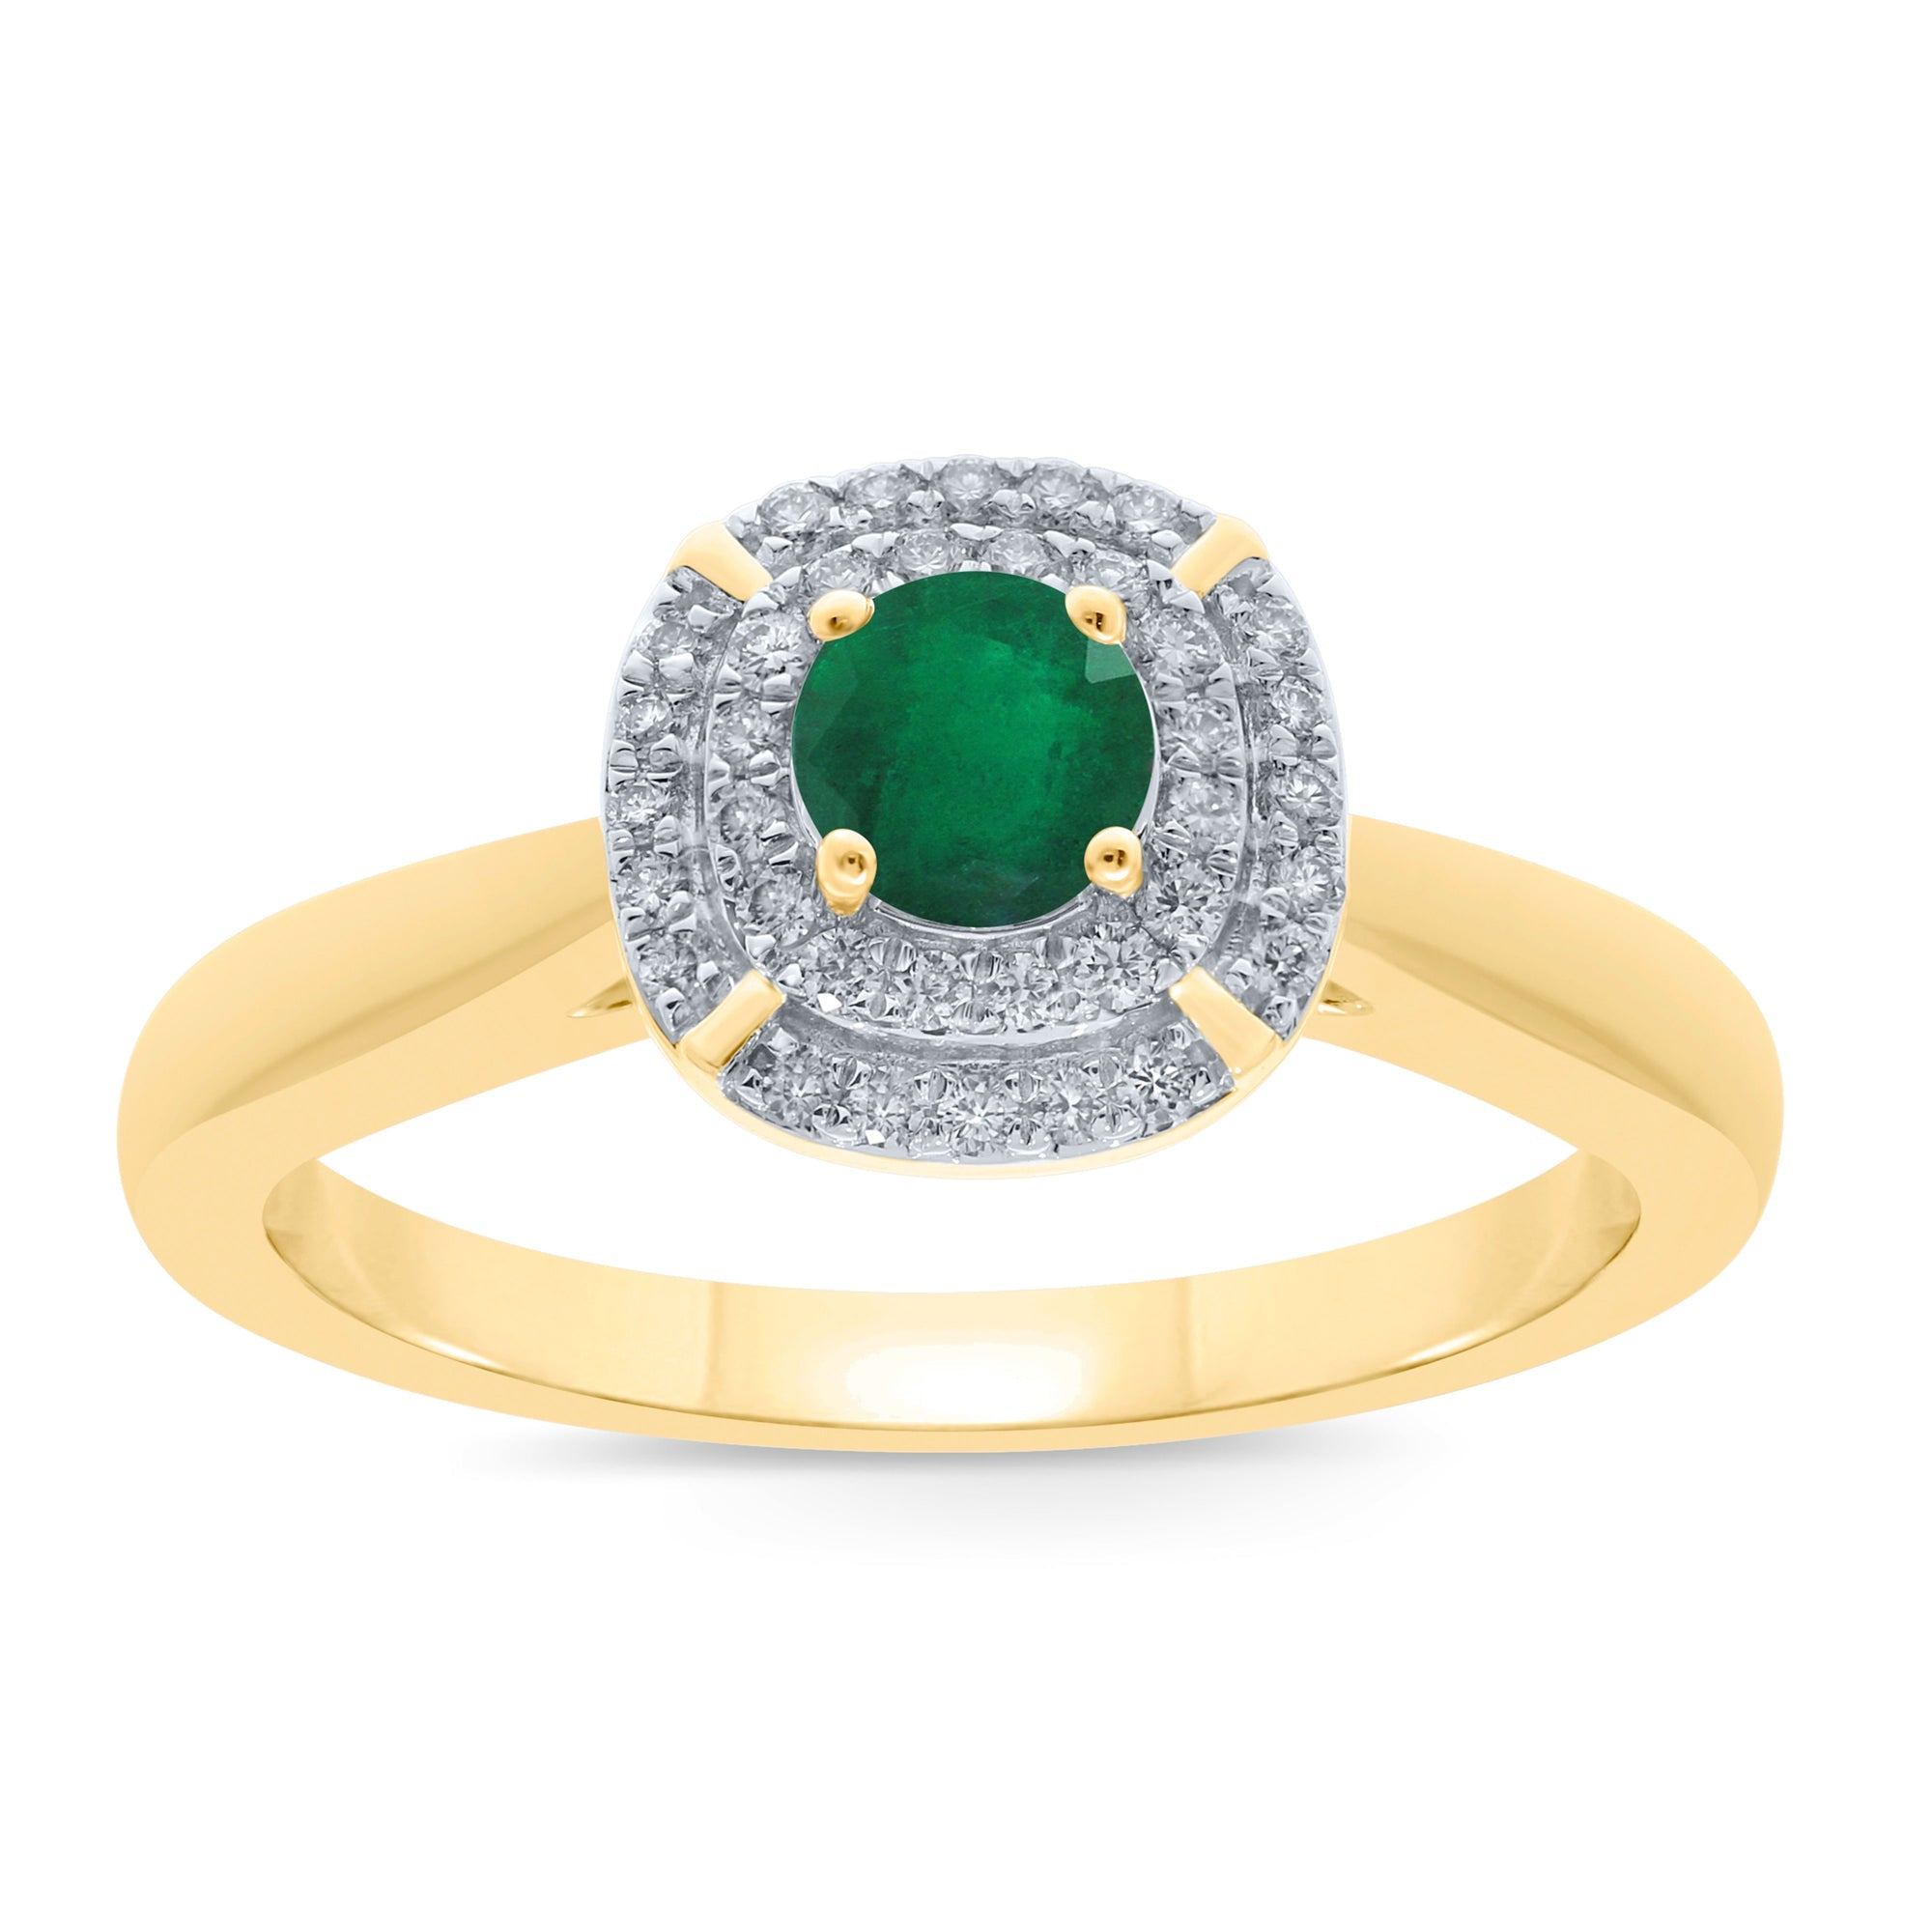 9ct gold 4.5mm round emerald & diamond cluster ring 0.14ct